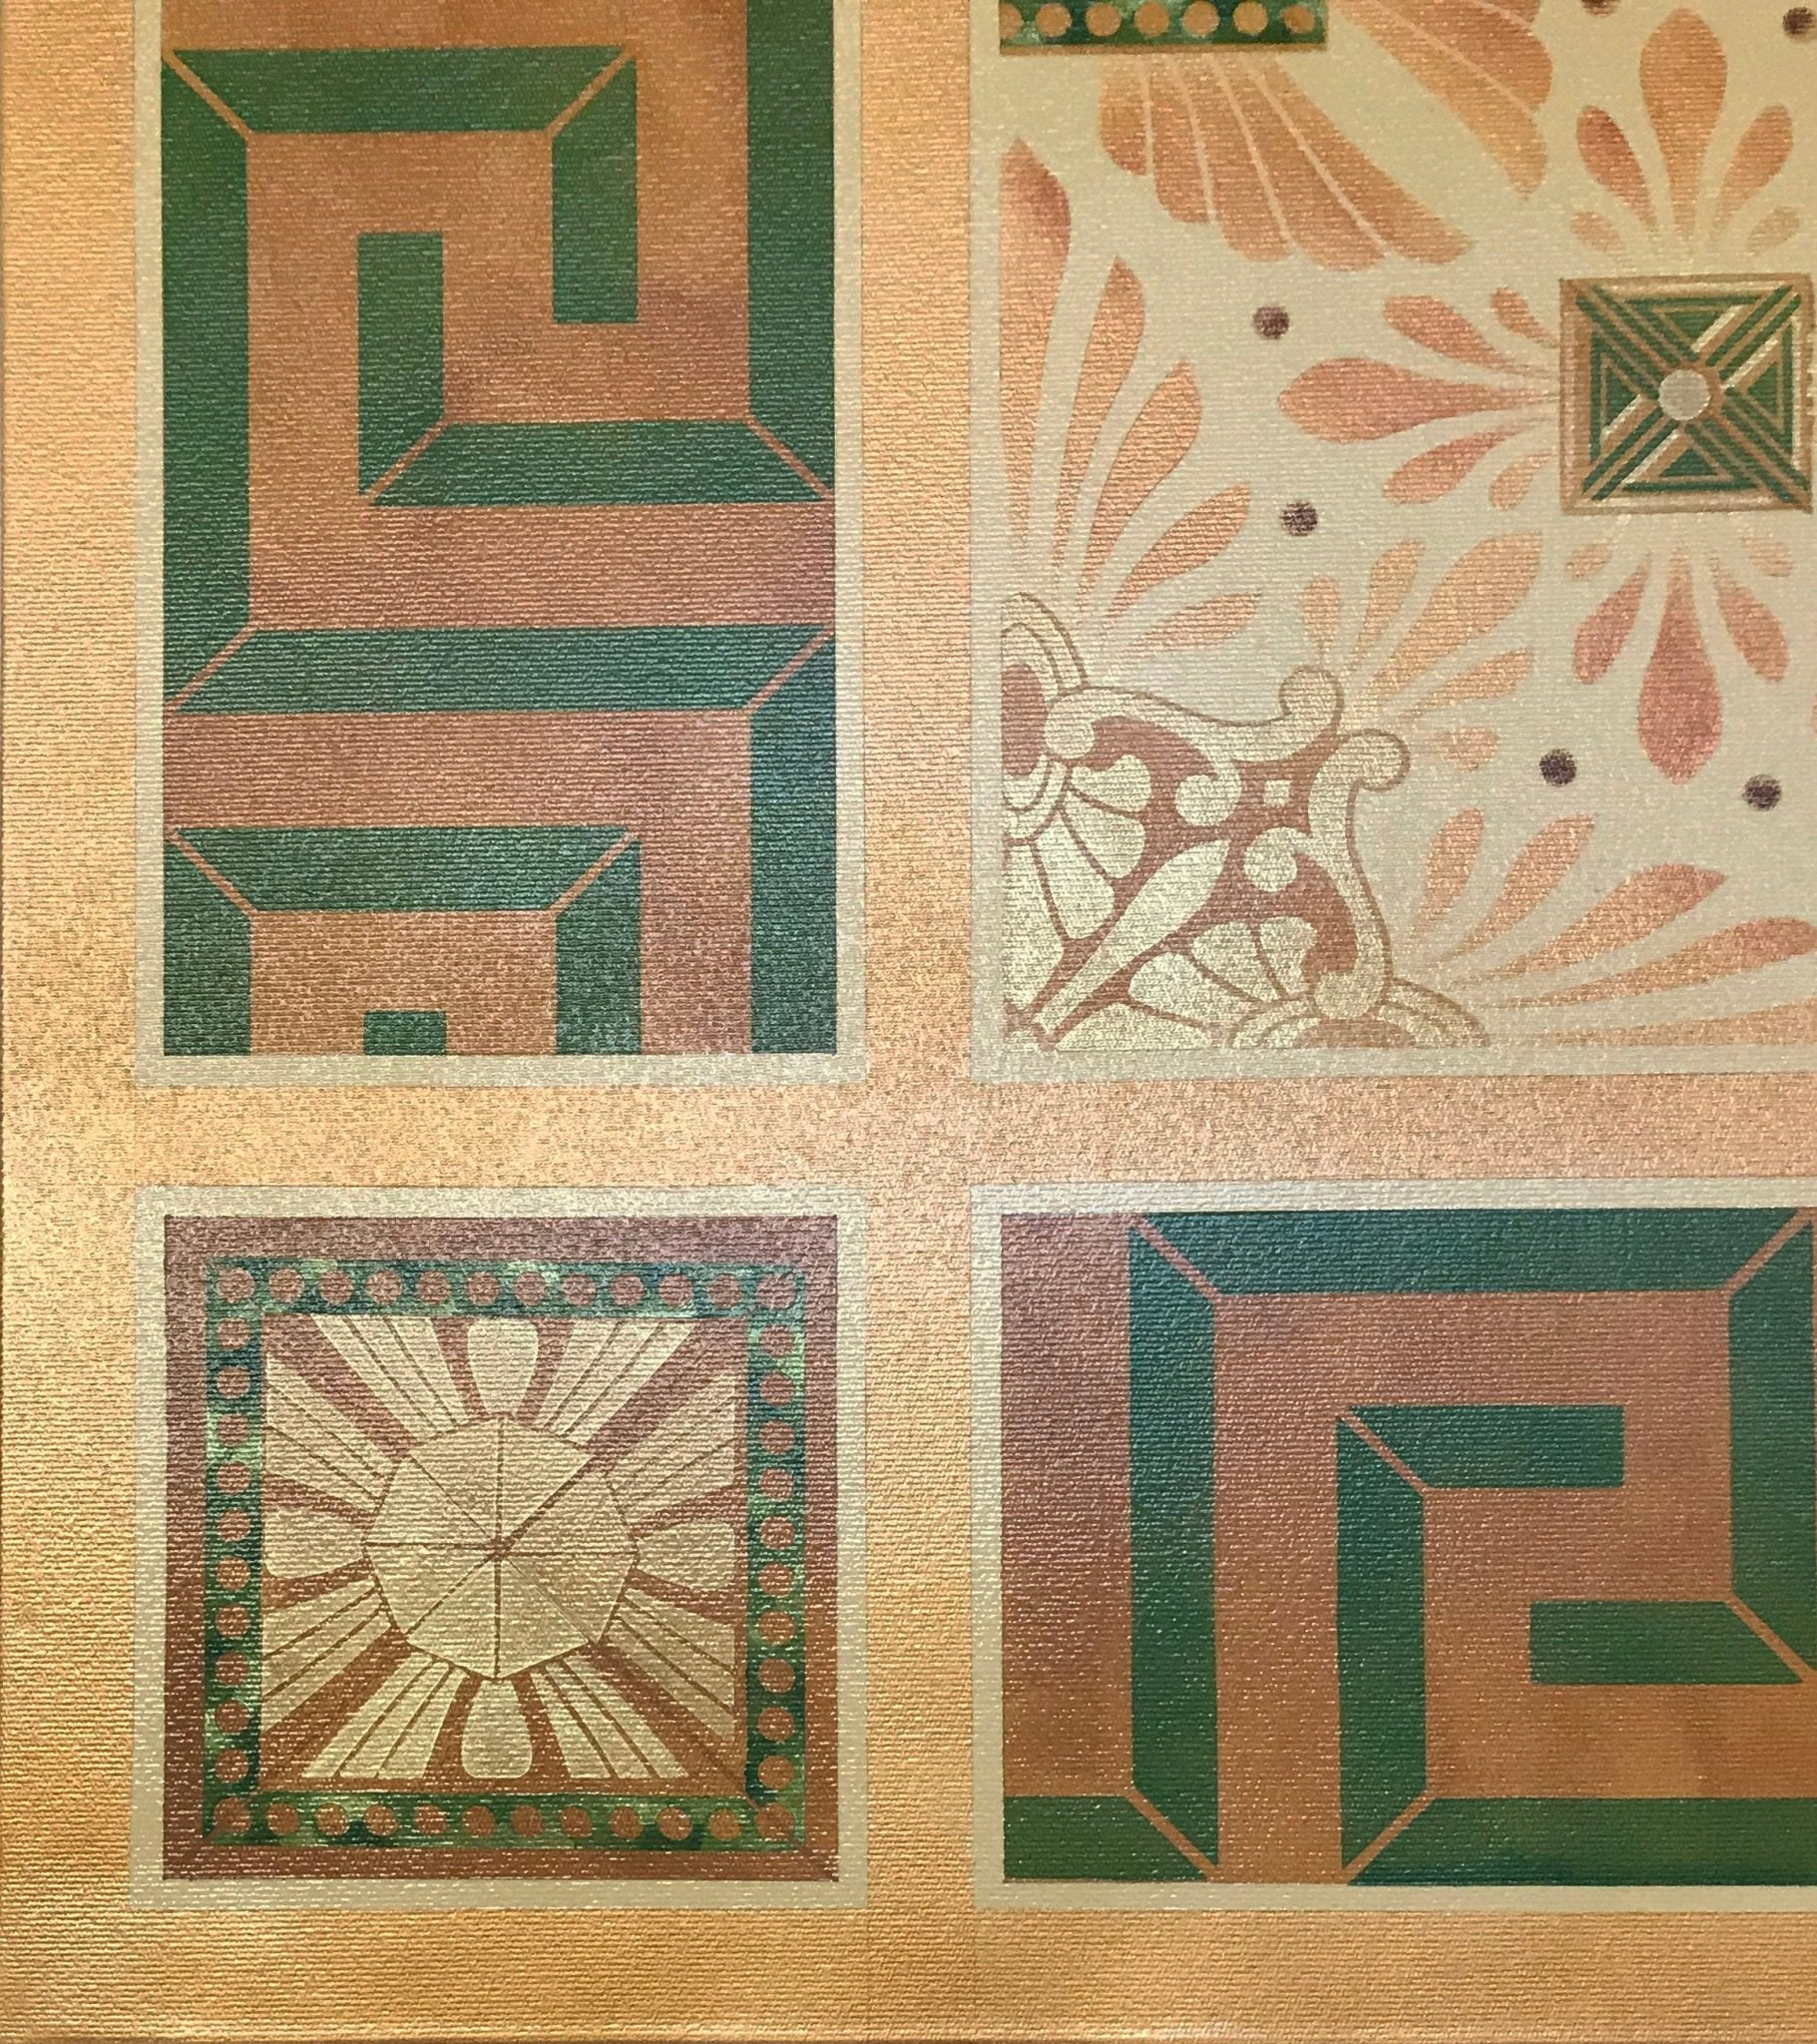 Close up corner image of this floorcloth, based on a design by Christopher Dresser.